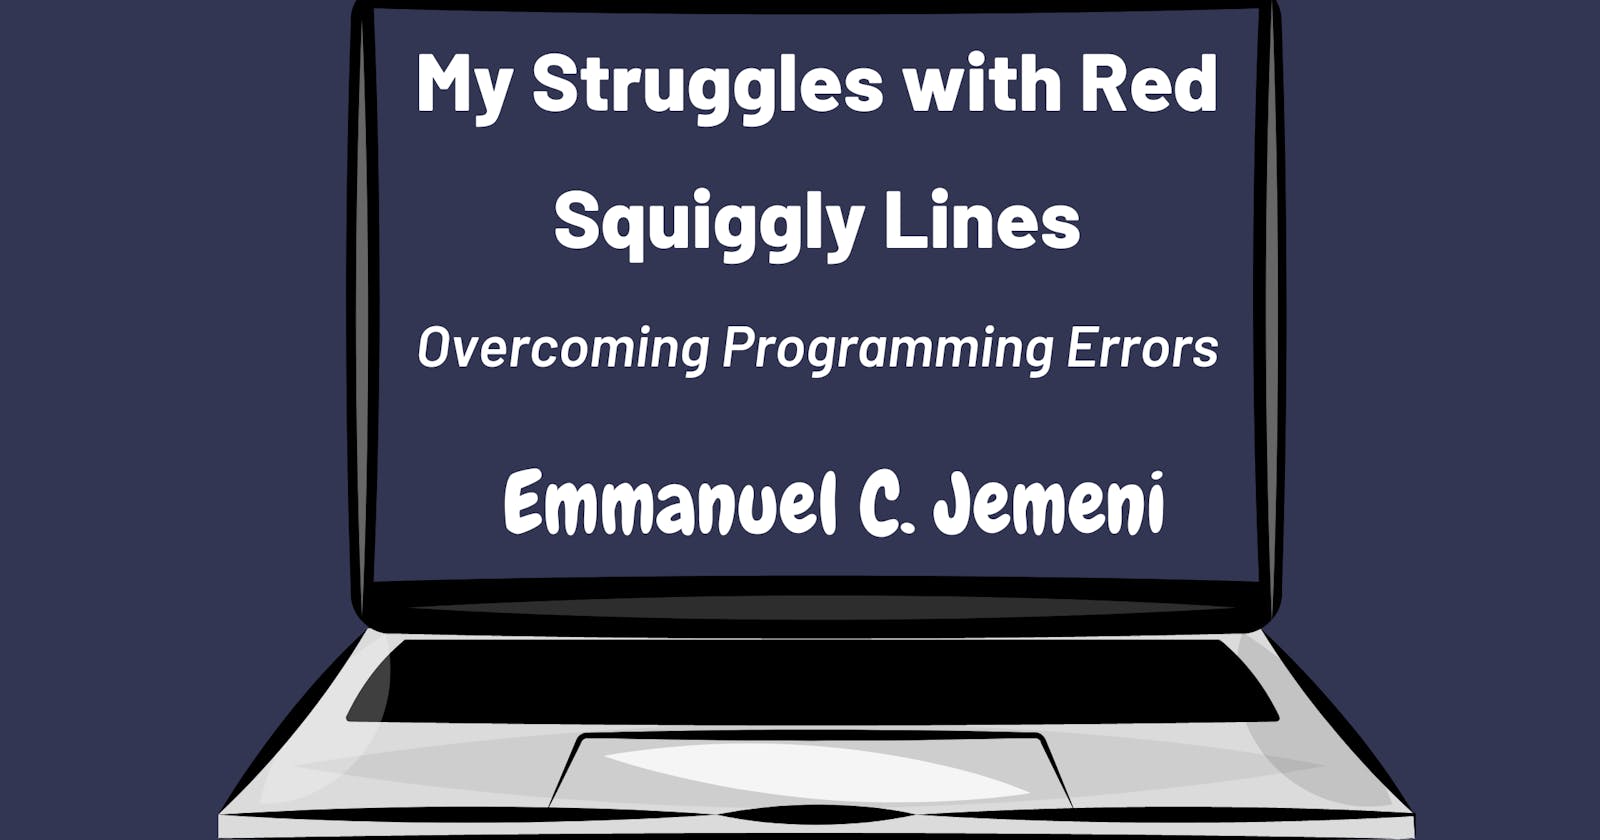 My Struggles with Red Squiggly Lines